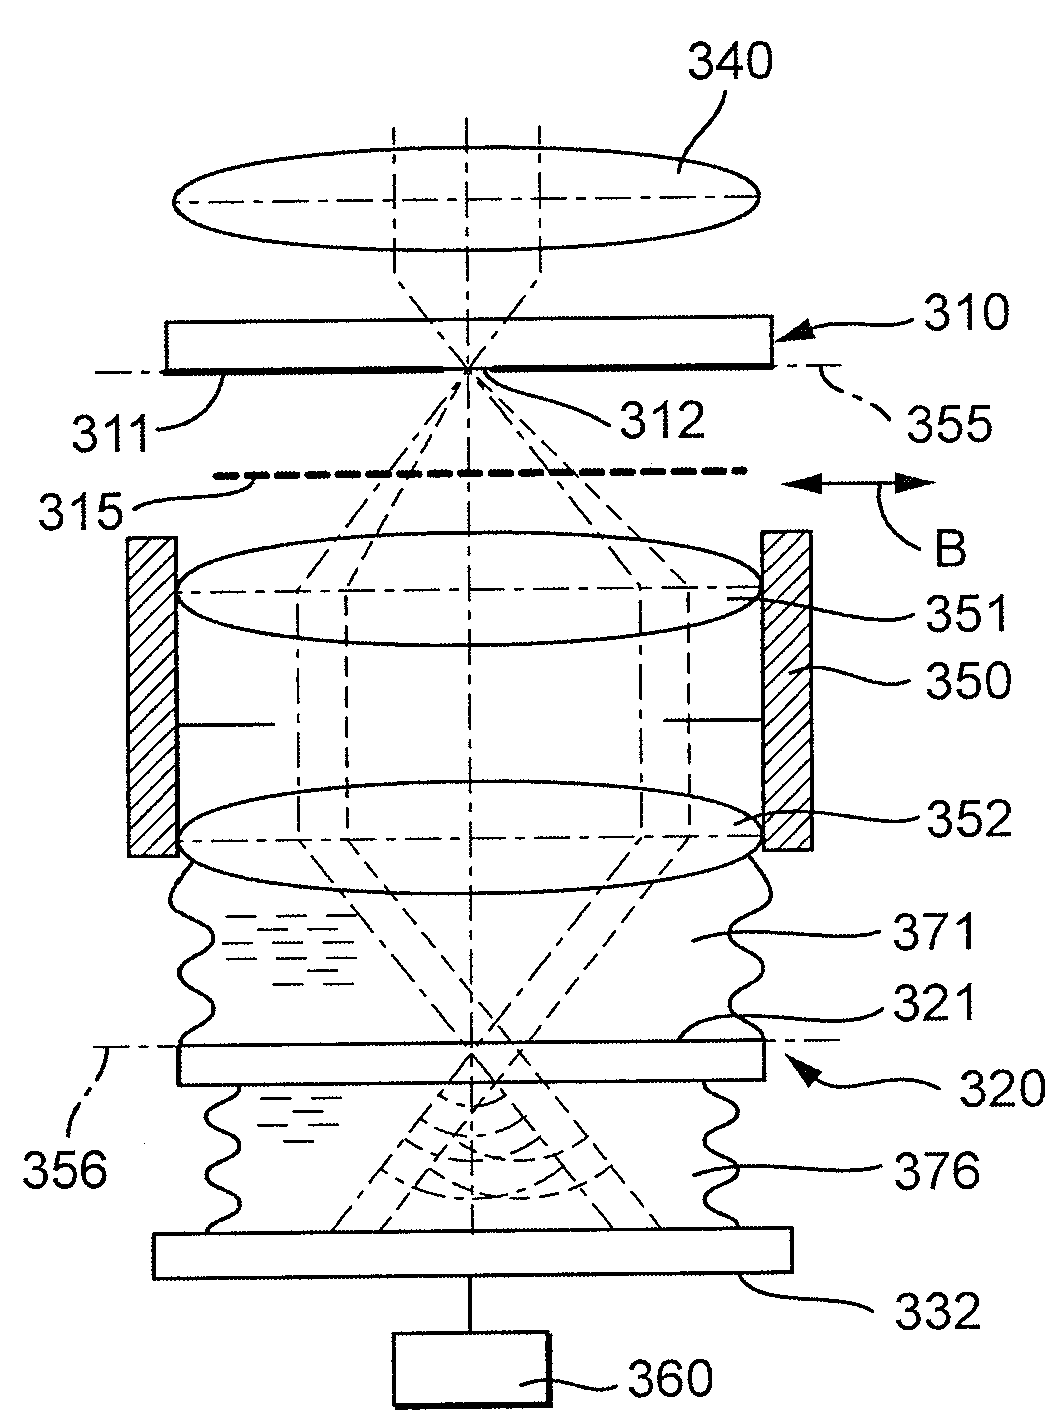 System for Measuring the Image Quality of an Optical Imaging System